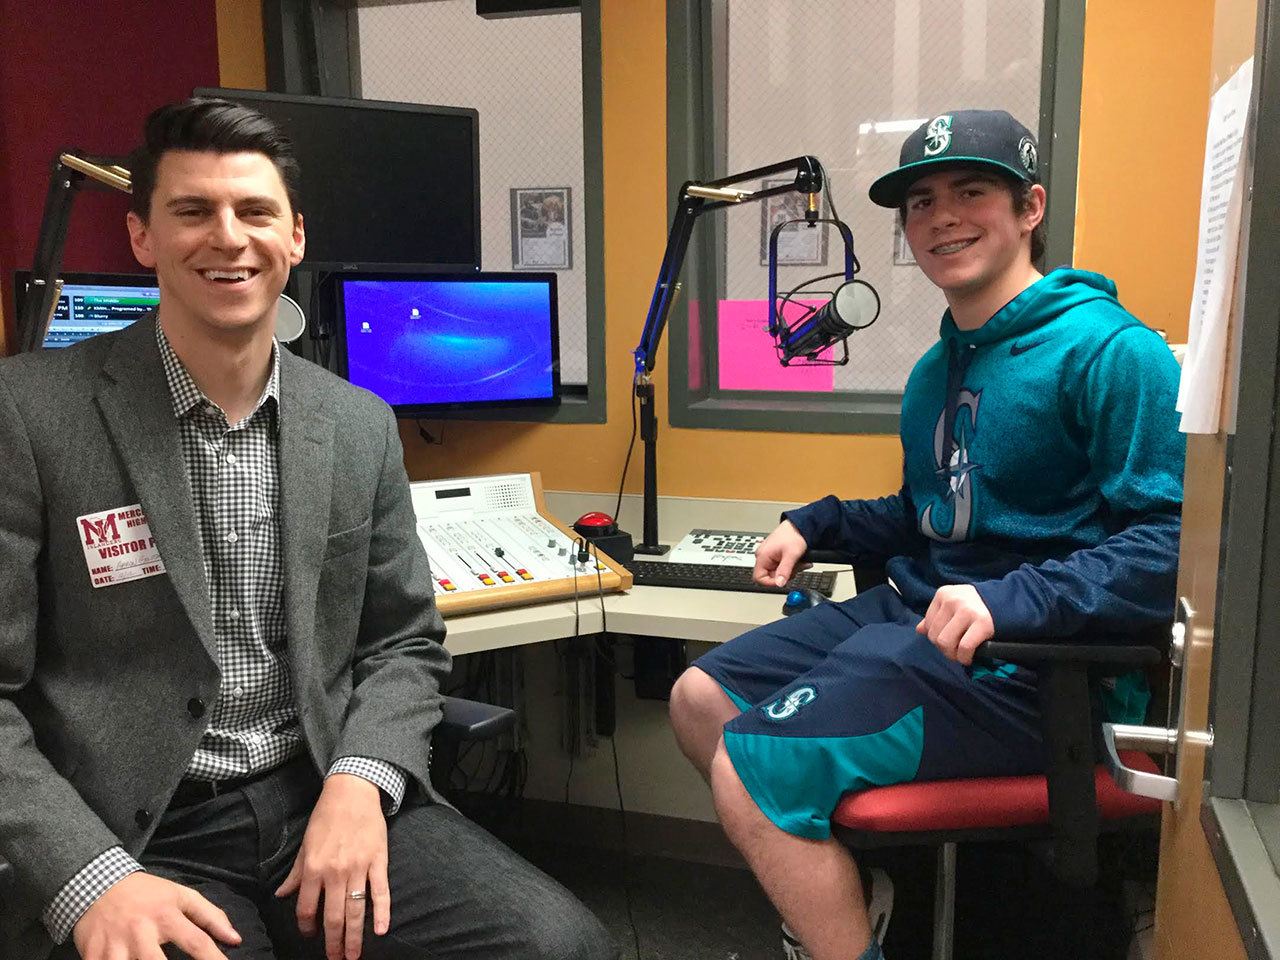 Seattle Mariners announcer Aaron Goldsmith, left, with MIHS student Max Tanzer. Photo courtesy of Craig Degginger/Mercer Island School District